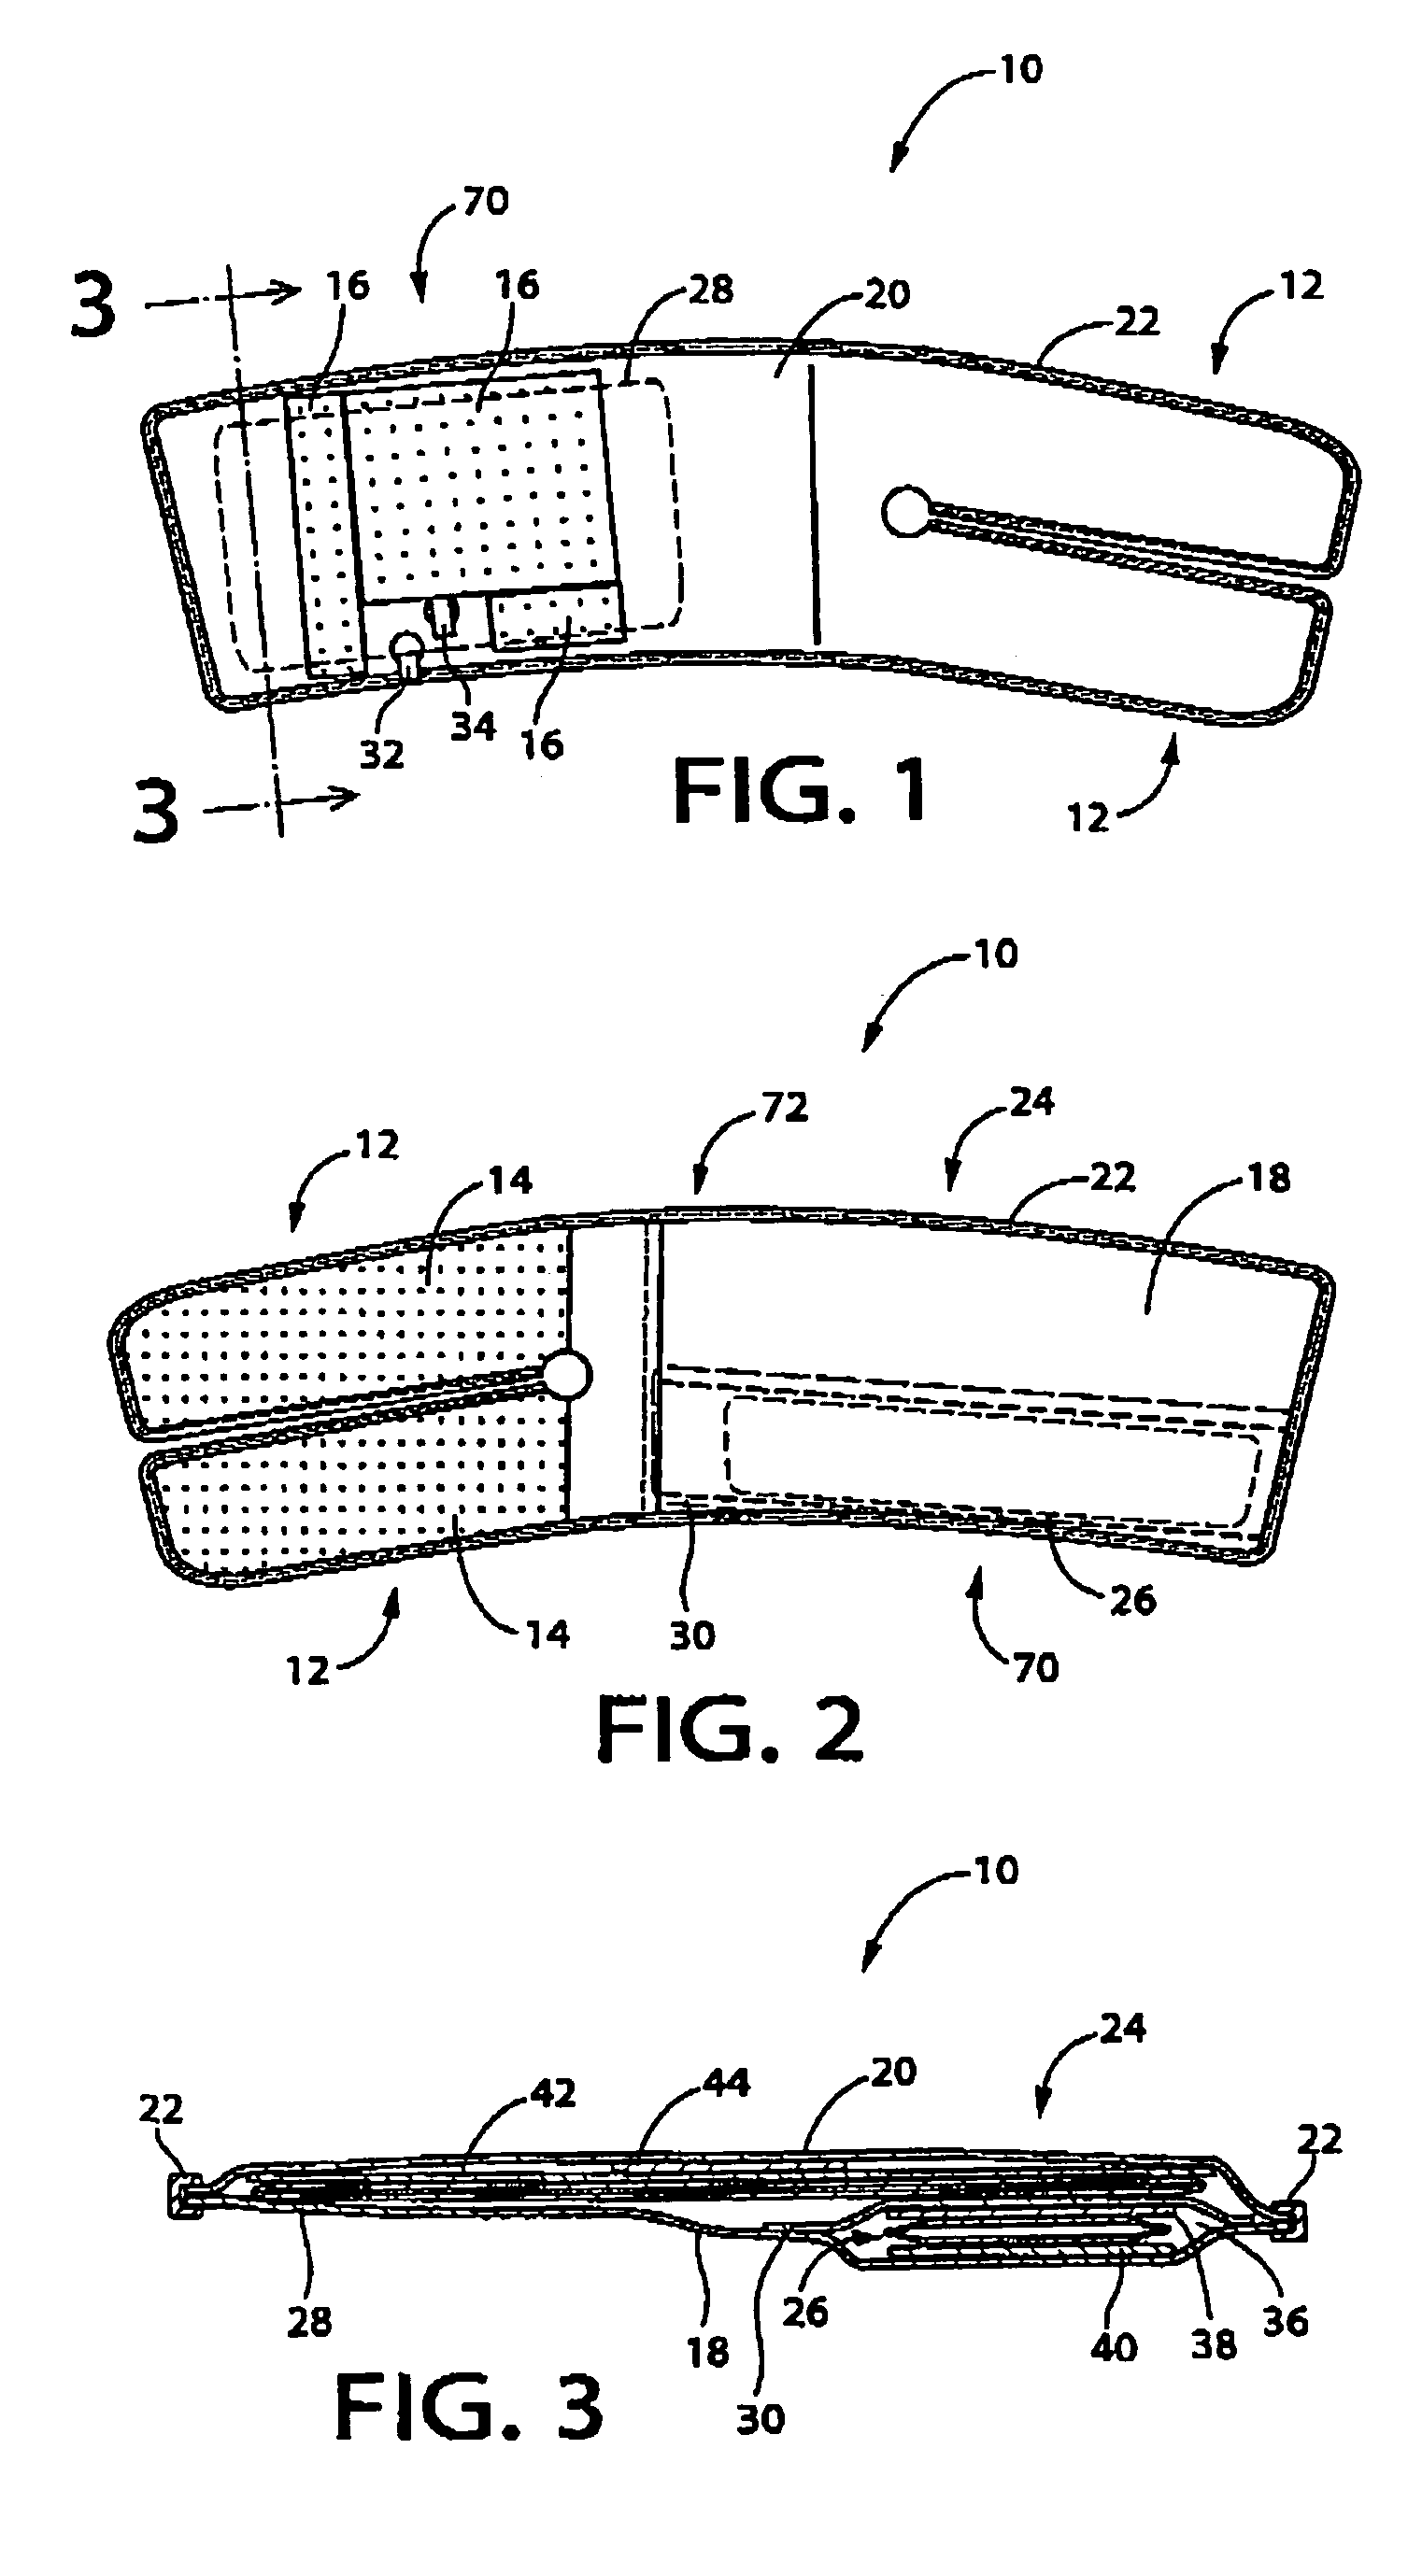 Inflatable cuff for blood pressure measurement